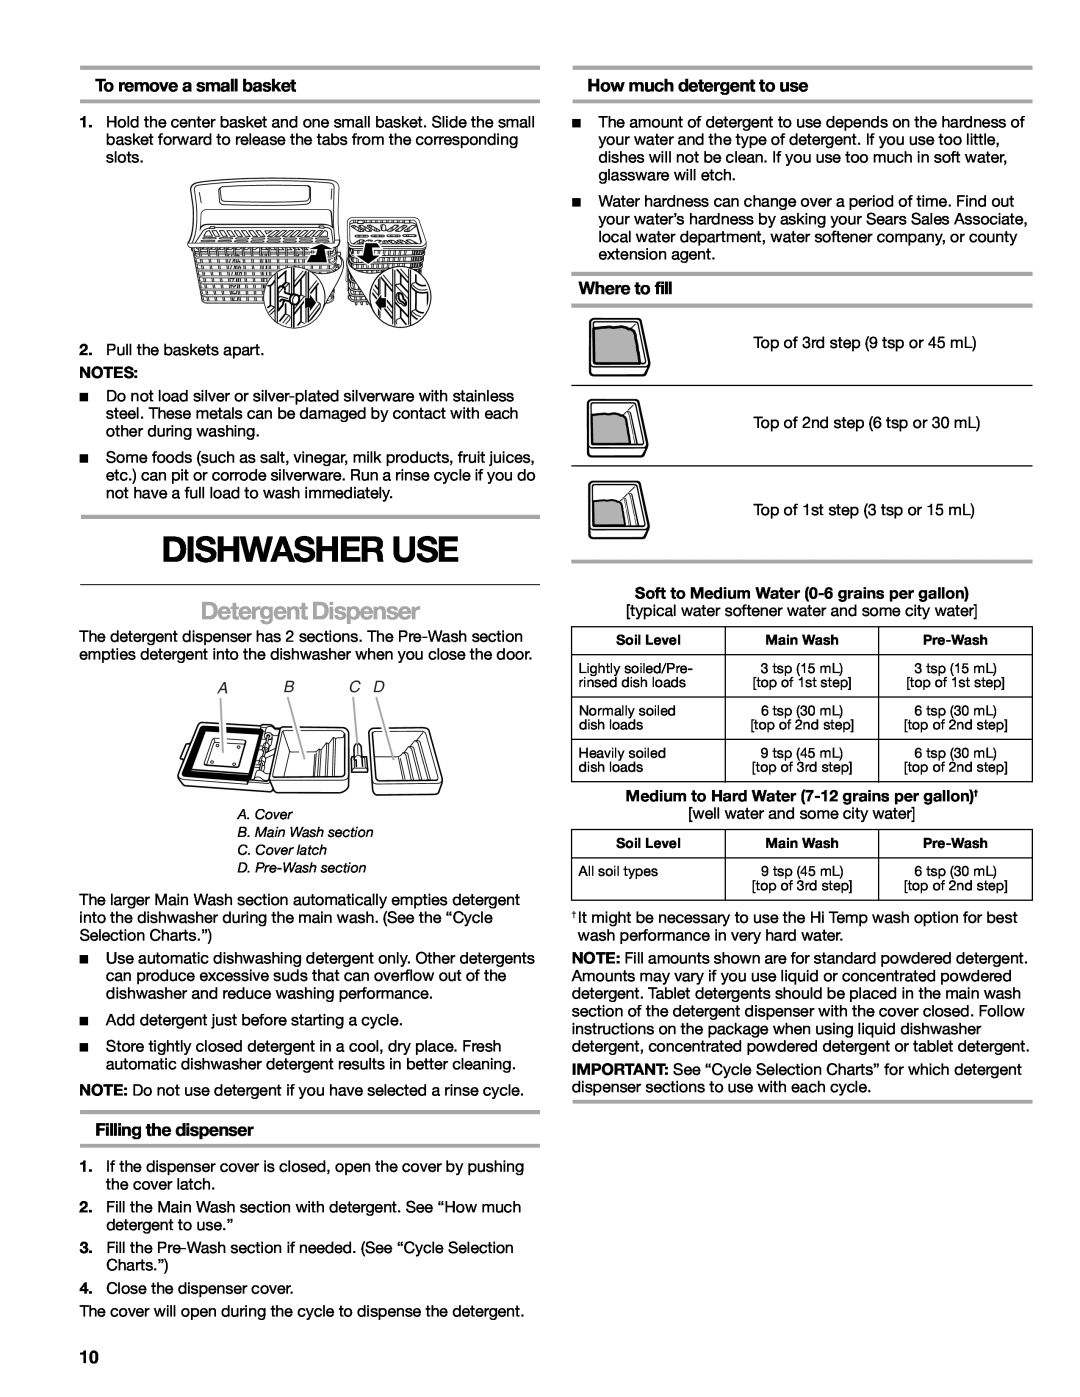 Sears 665.1359 Dishwasher Use, Detergent Dispenser, To remove a small basket, How much detergent to use, Where to fill 